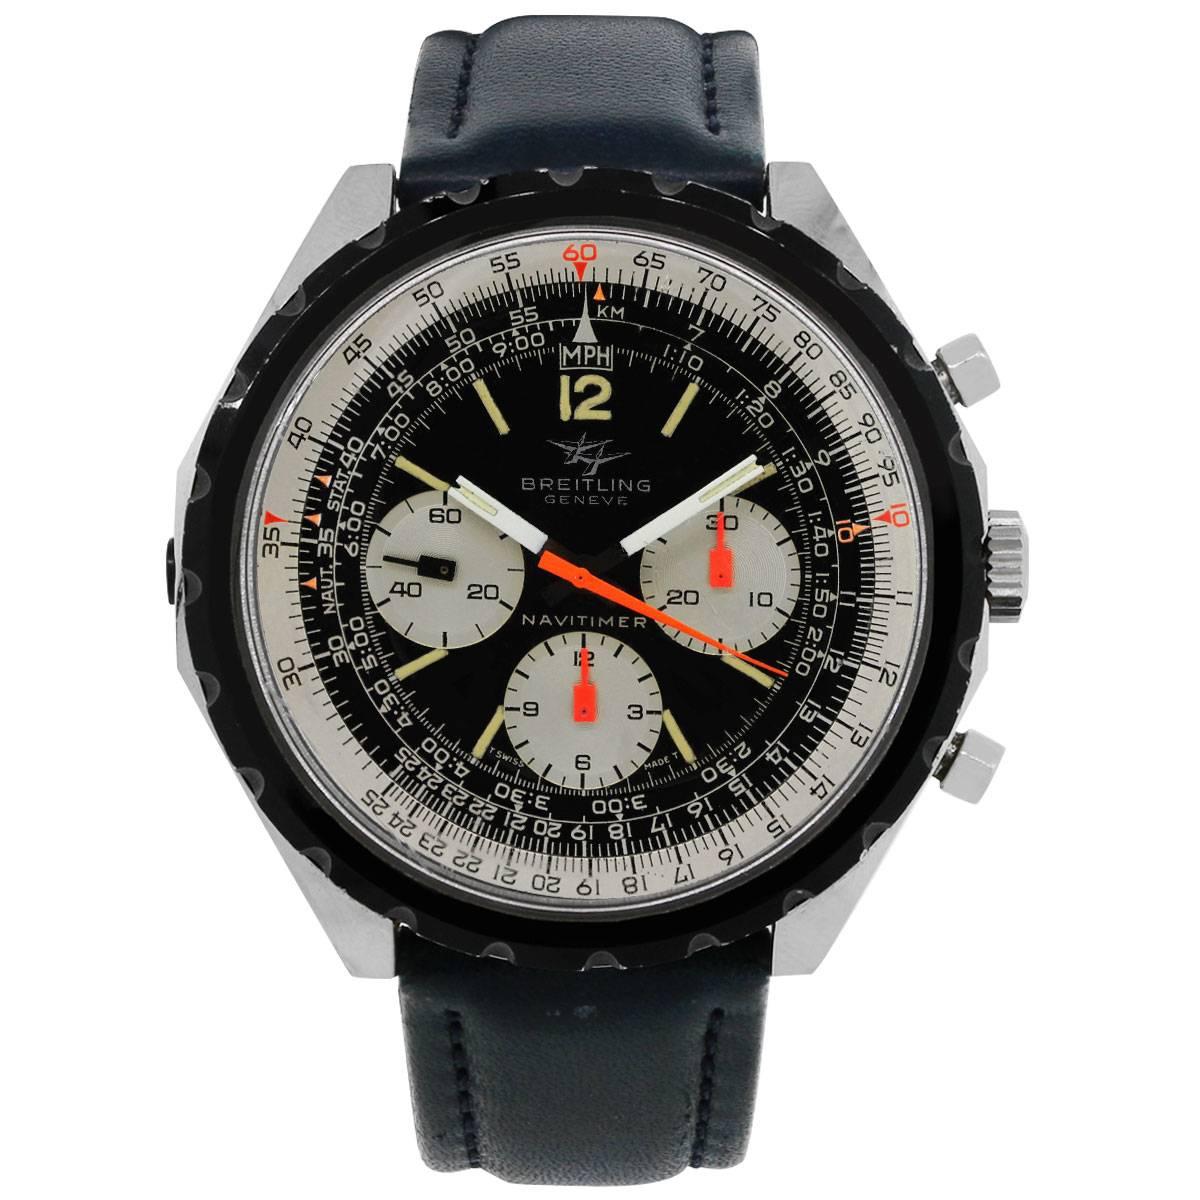 Brand: Breitling
MPN: 0816
Model: Navitimer
Case Material: Stainless Steel
Case Diameter: 49mm
Crystal: Acrylic
Bezel: Unidirectional rotating bezel with internal rotating
Dial: Black chronograph dial 3 silver sub dials.
Bracelet: Blue genuine